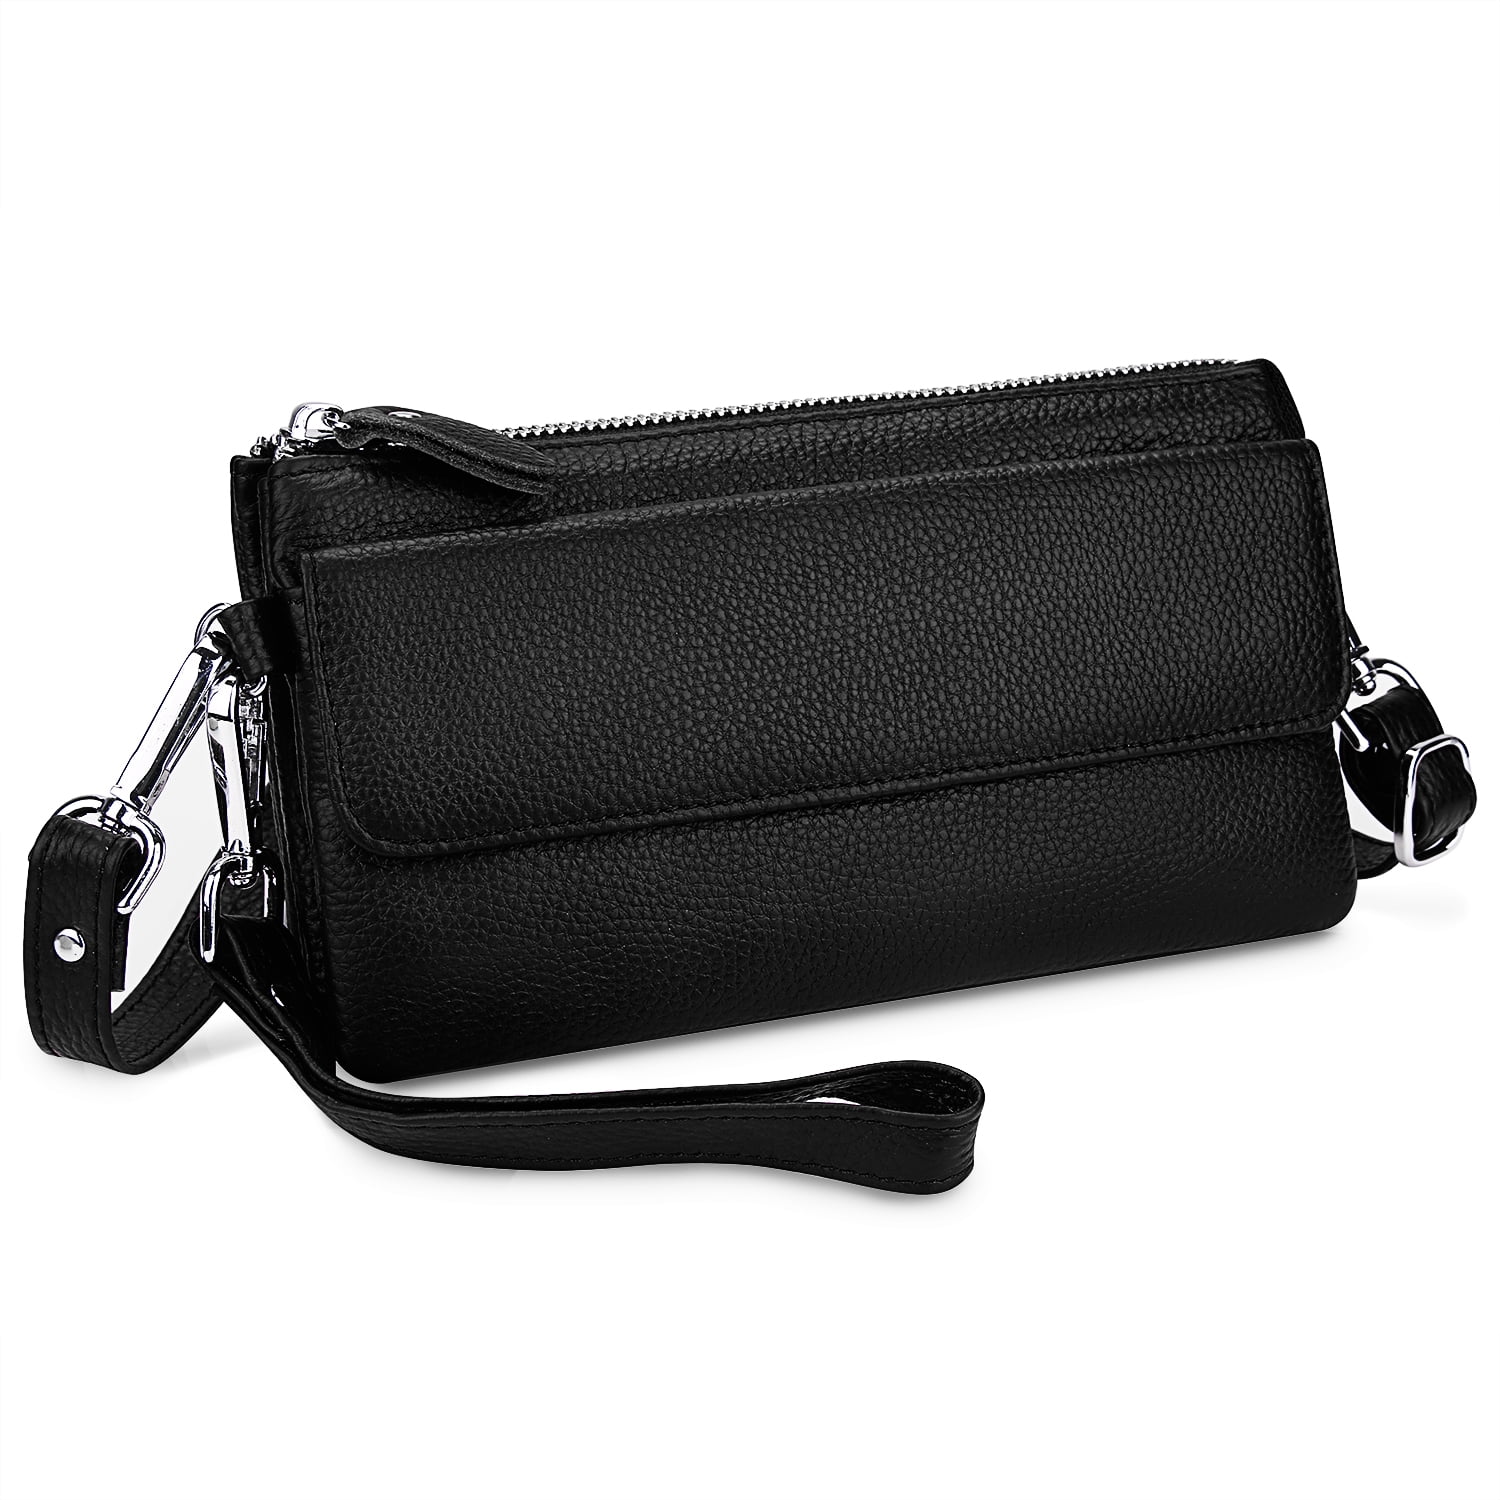 Small Leather Zippered Clutch Bag for Women with Detachable